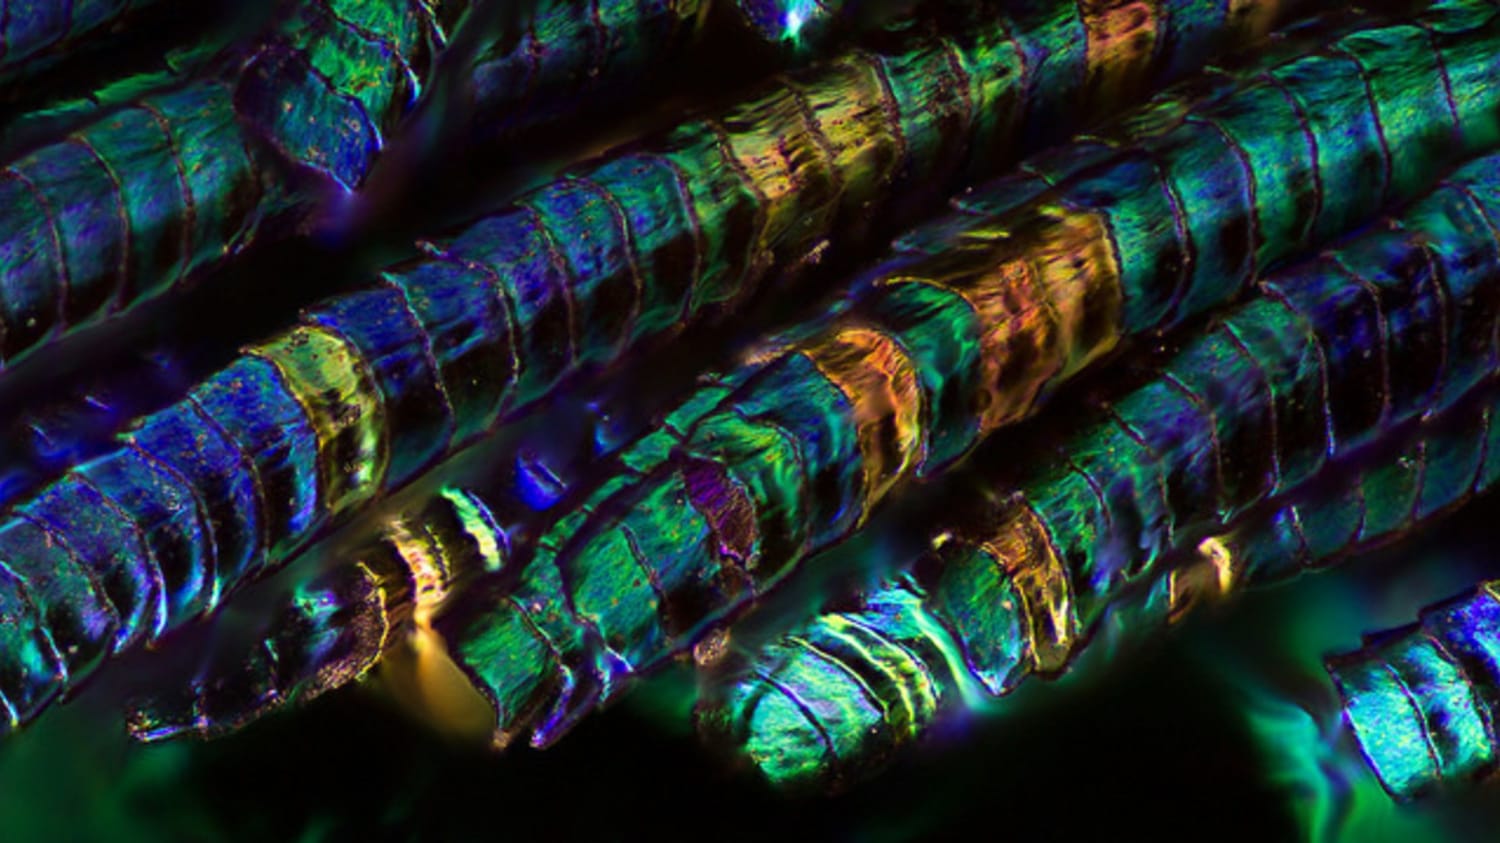 Peacock Feathers Look Amazing Under a Microscope